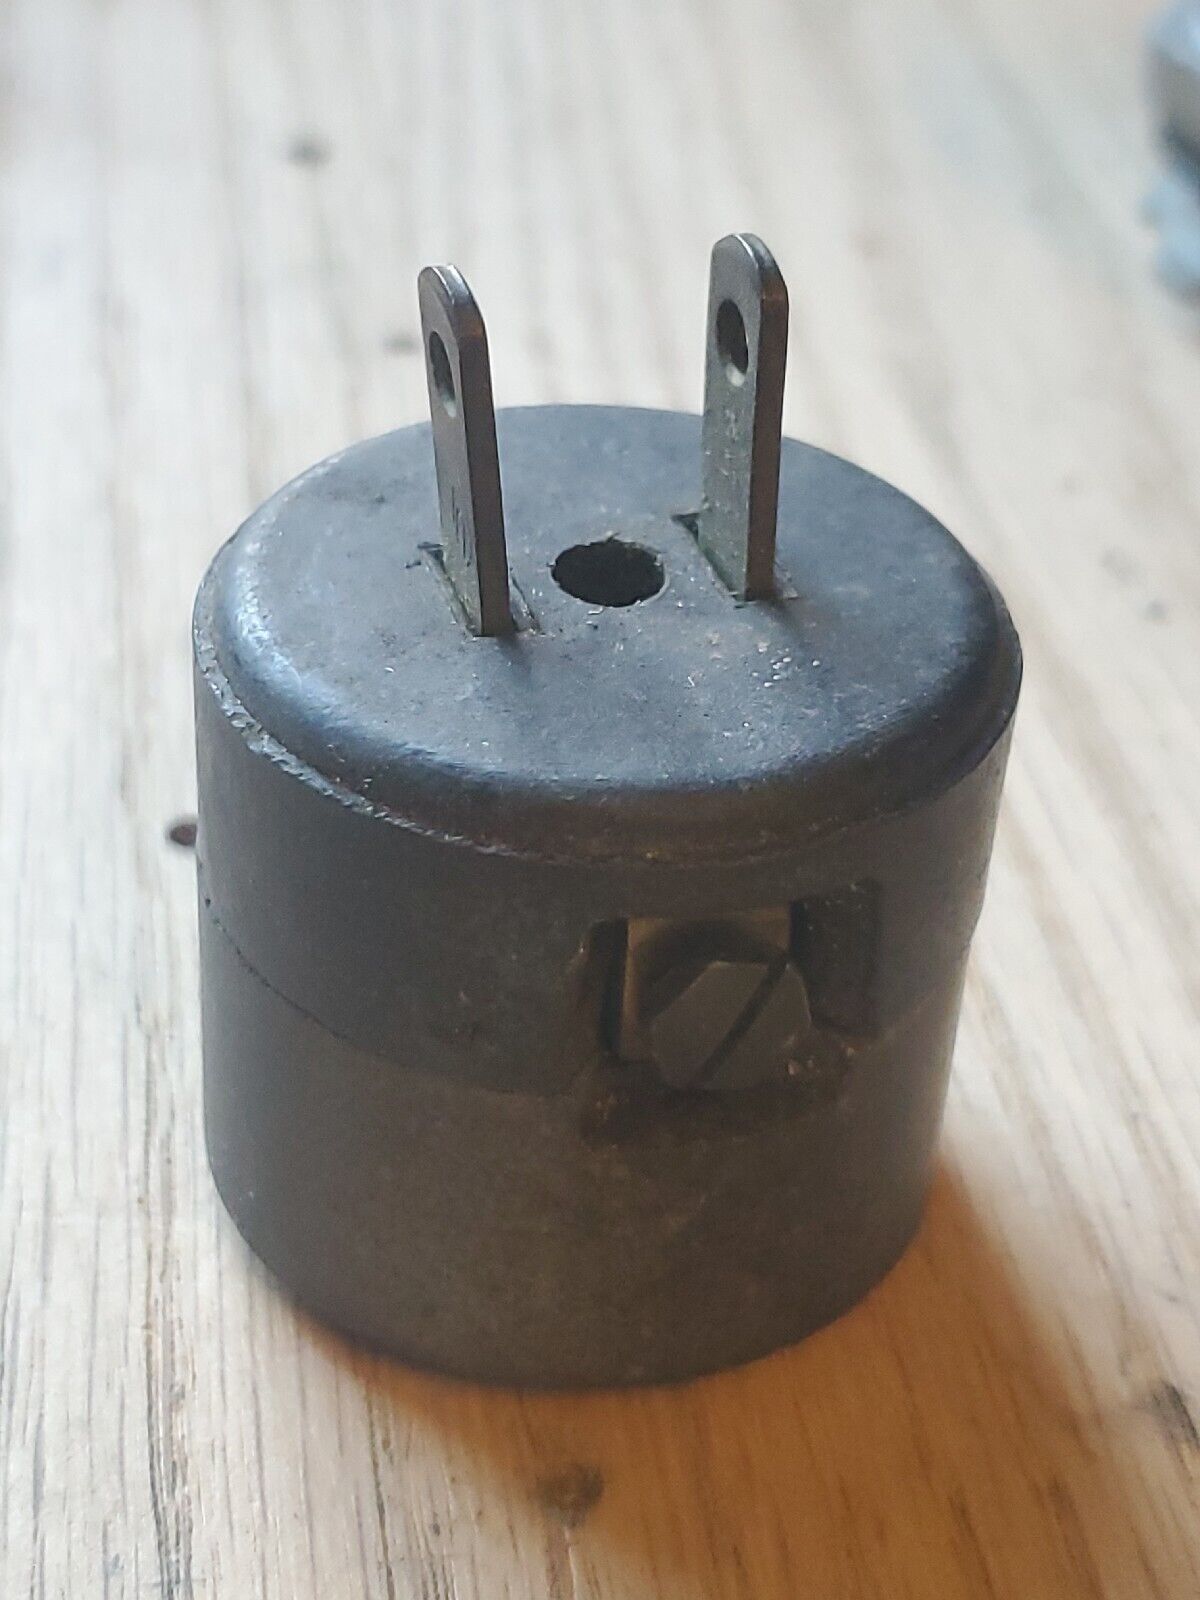 Vintage Hubble Bakelite Outlet Plug In Adapter Receptacle 3 Prong To 2 Prong